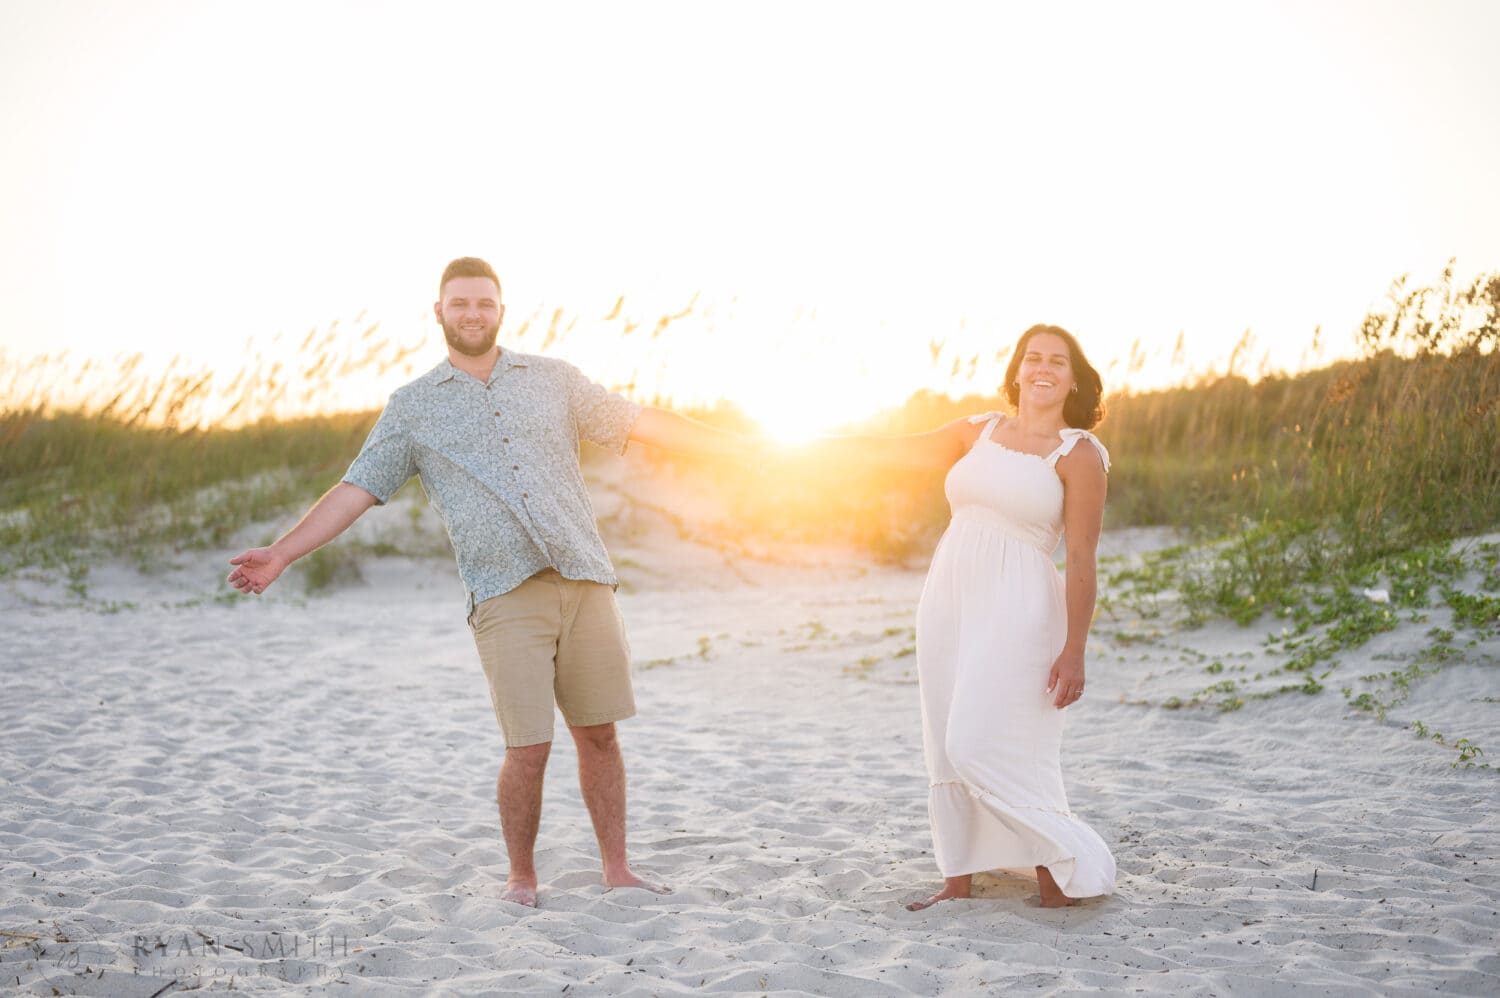 Holding hands in the sunset - Huntington Beach State Park - Myrtle Beach